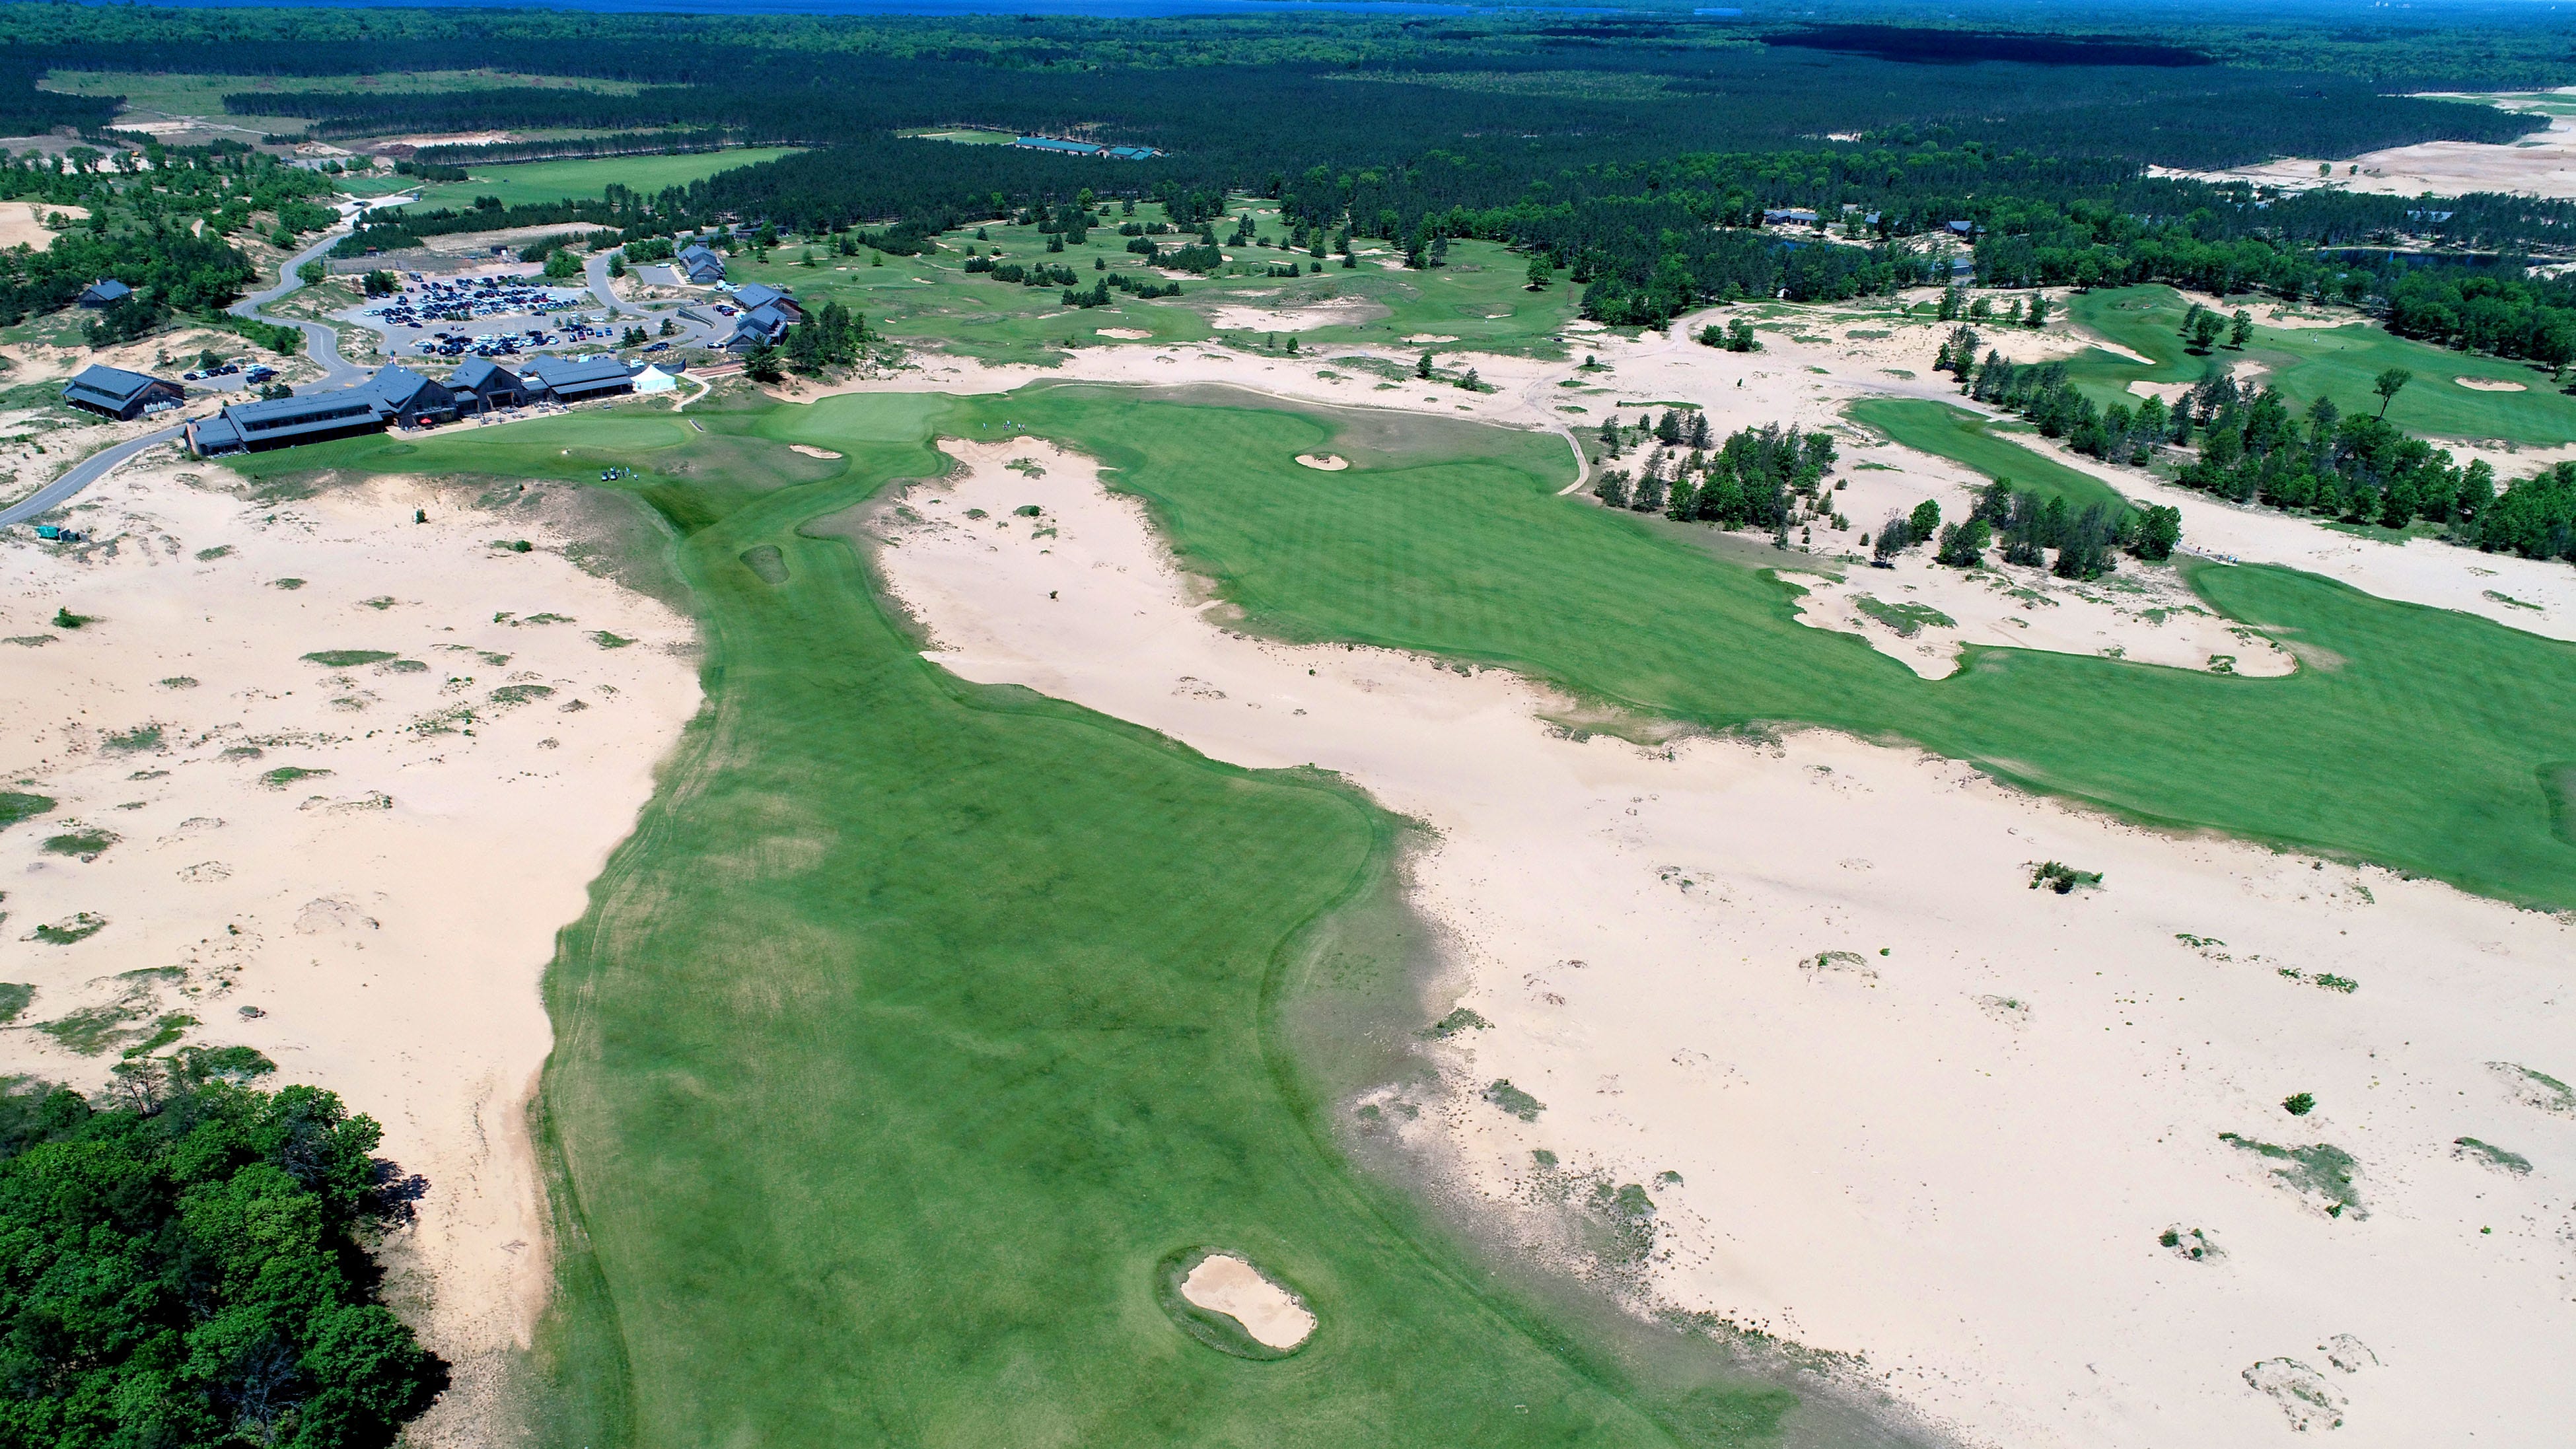 The main clubhouse at Sand Valley Golf Resort in Rome, upper left, and the Mammoth Dunes course.